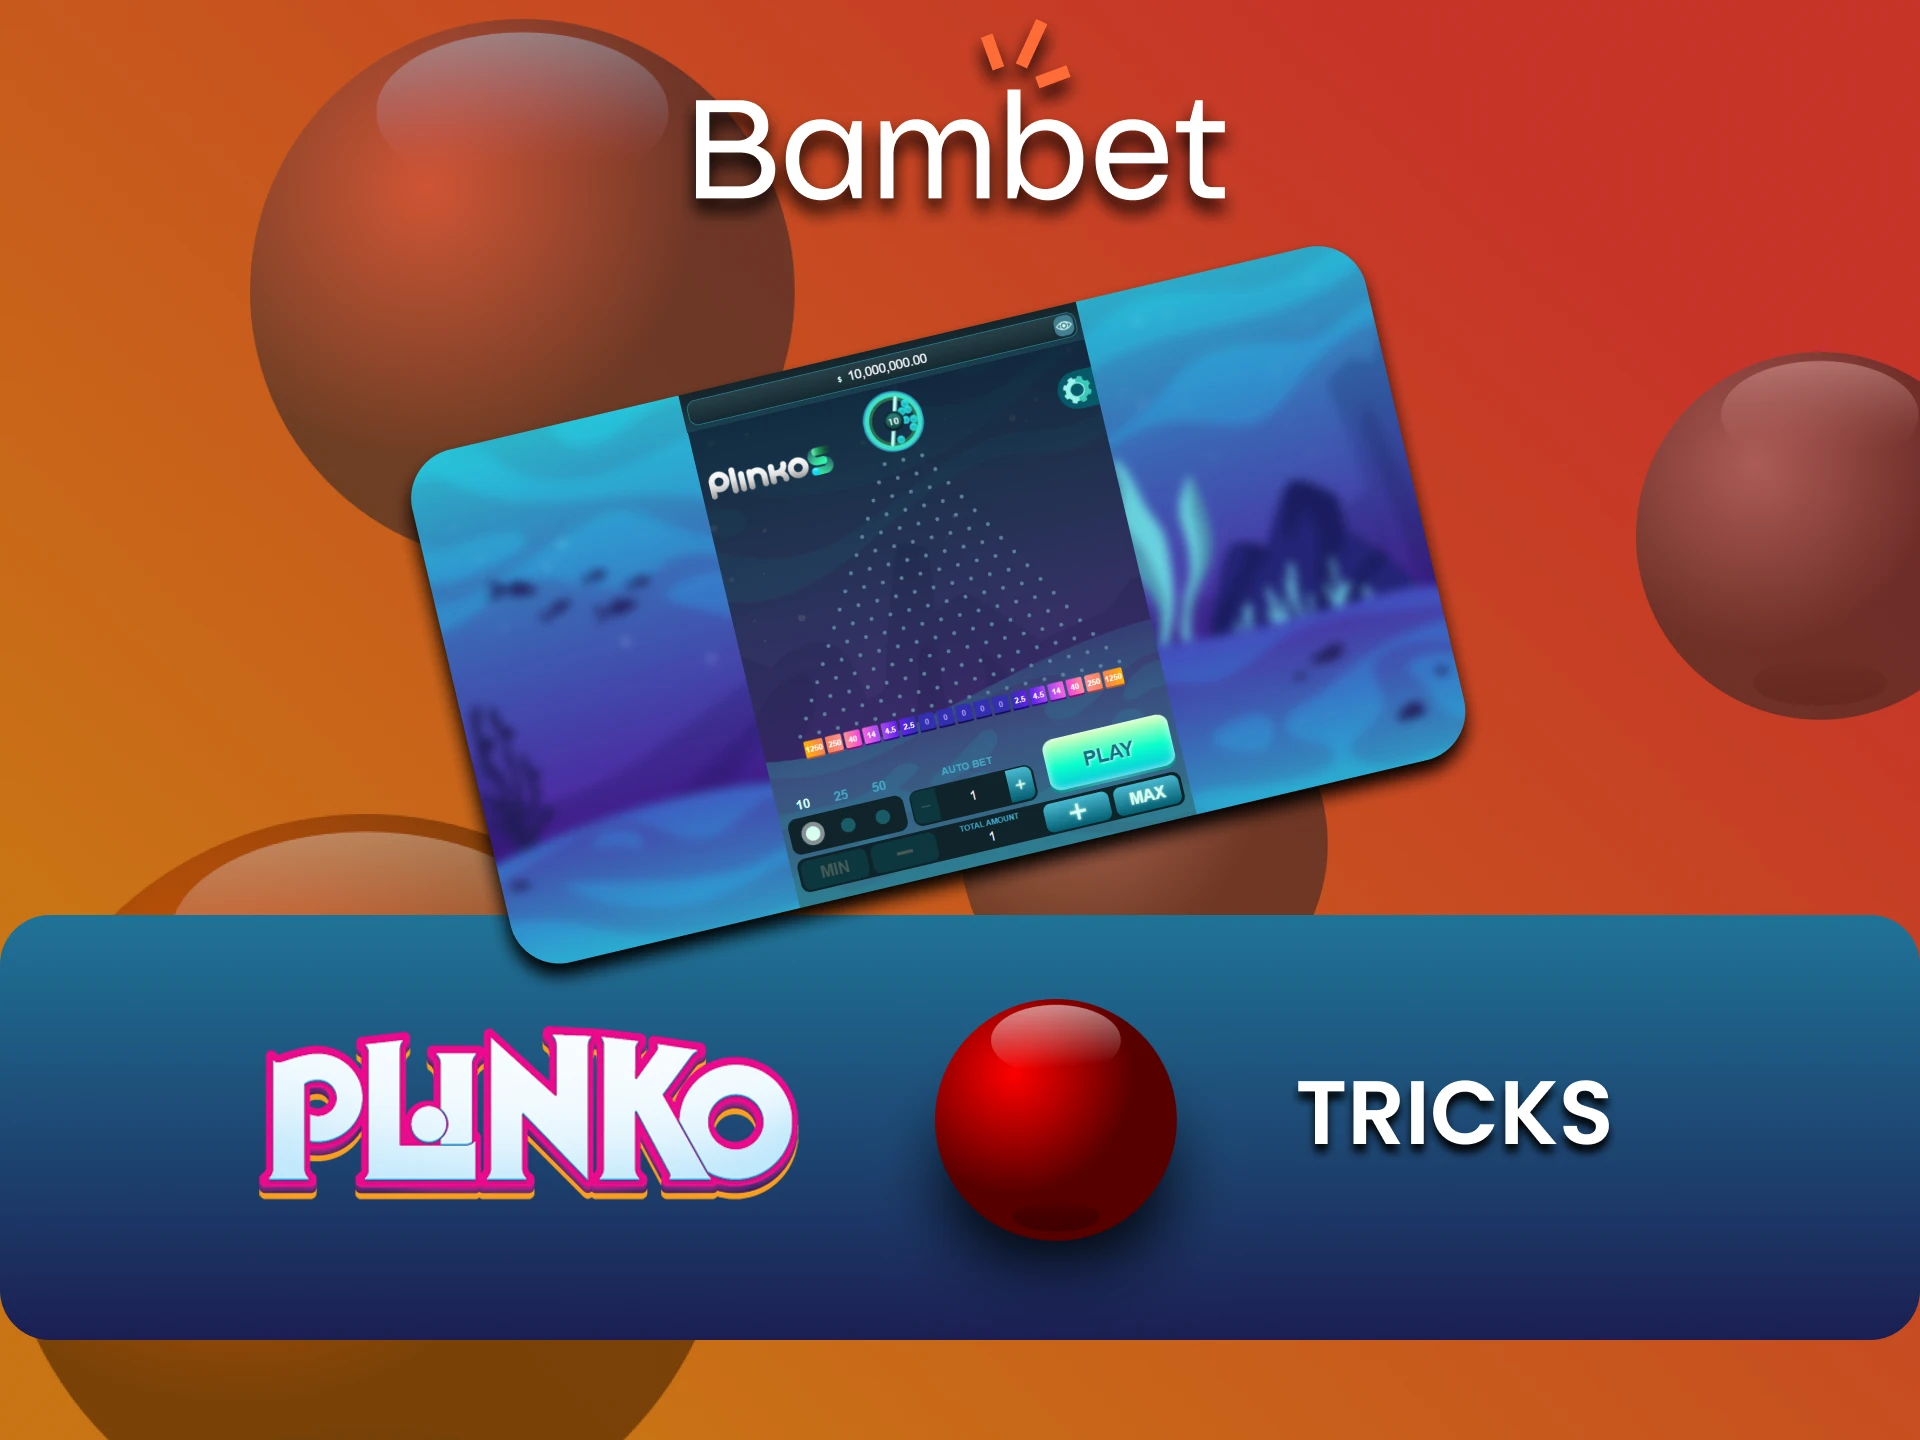 We will tell you about winning tricks for Plinko on Bambet.